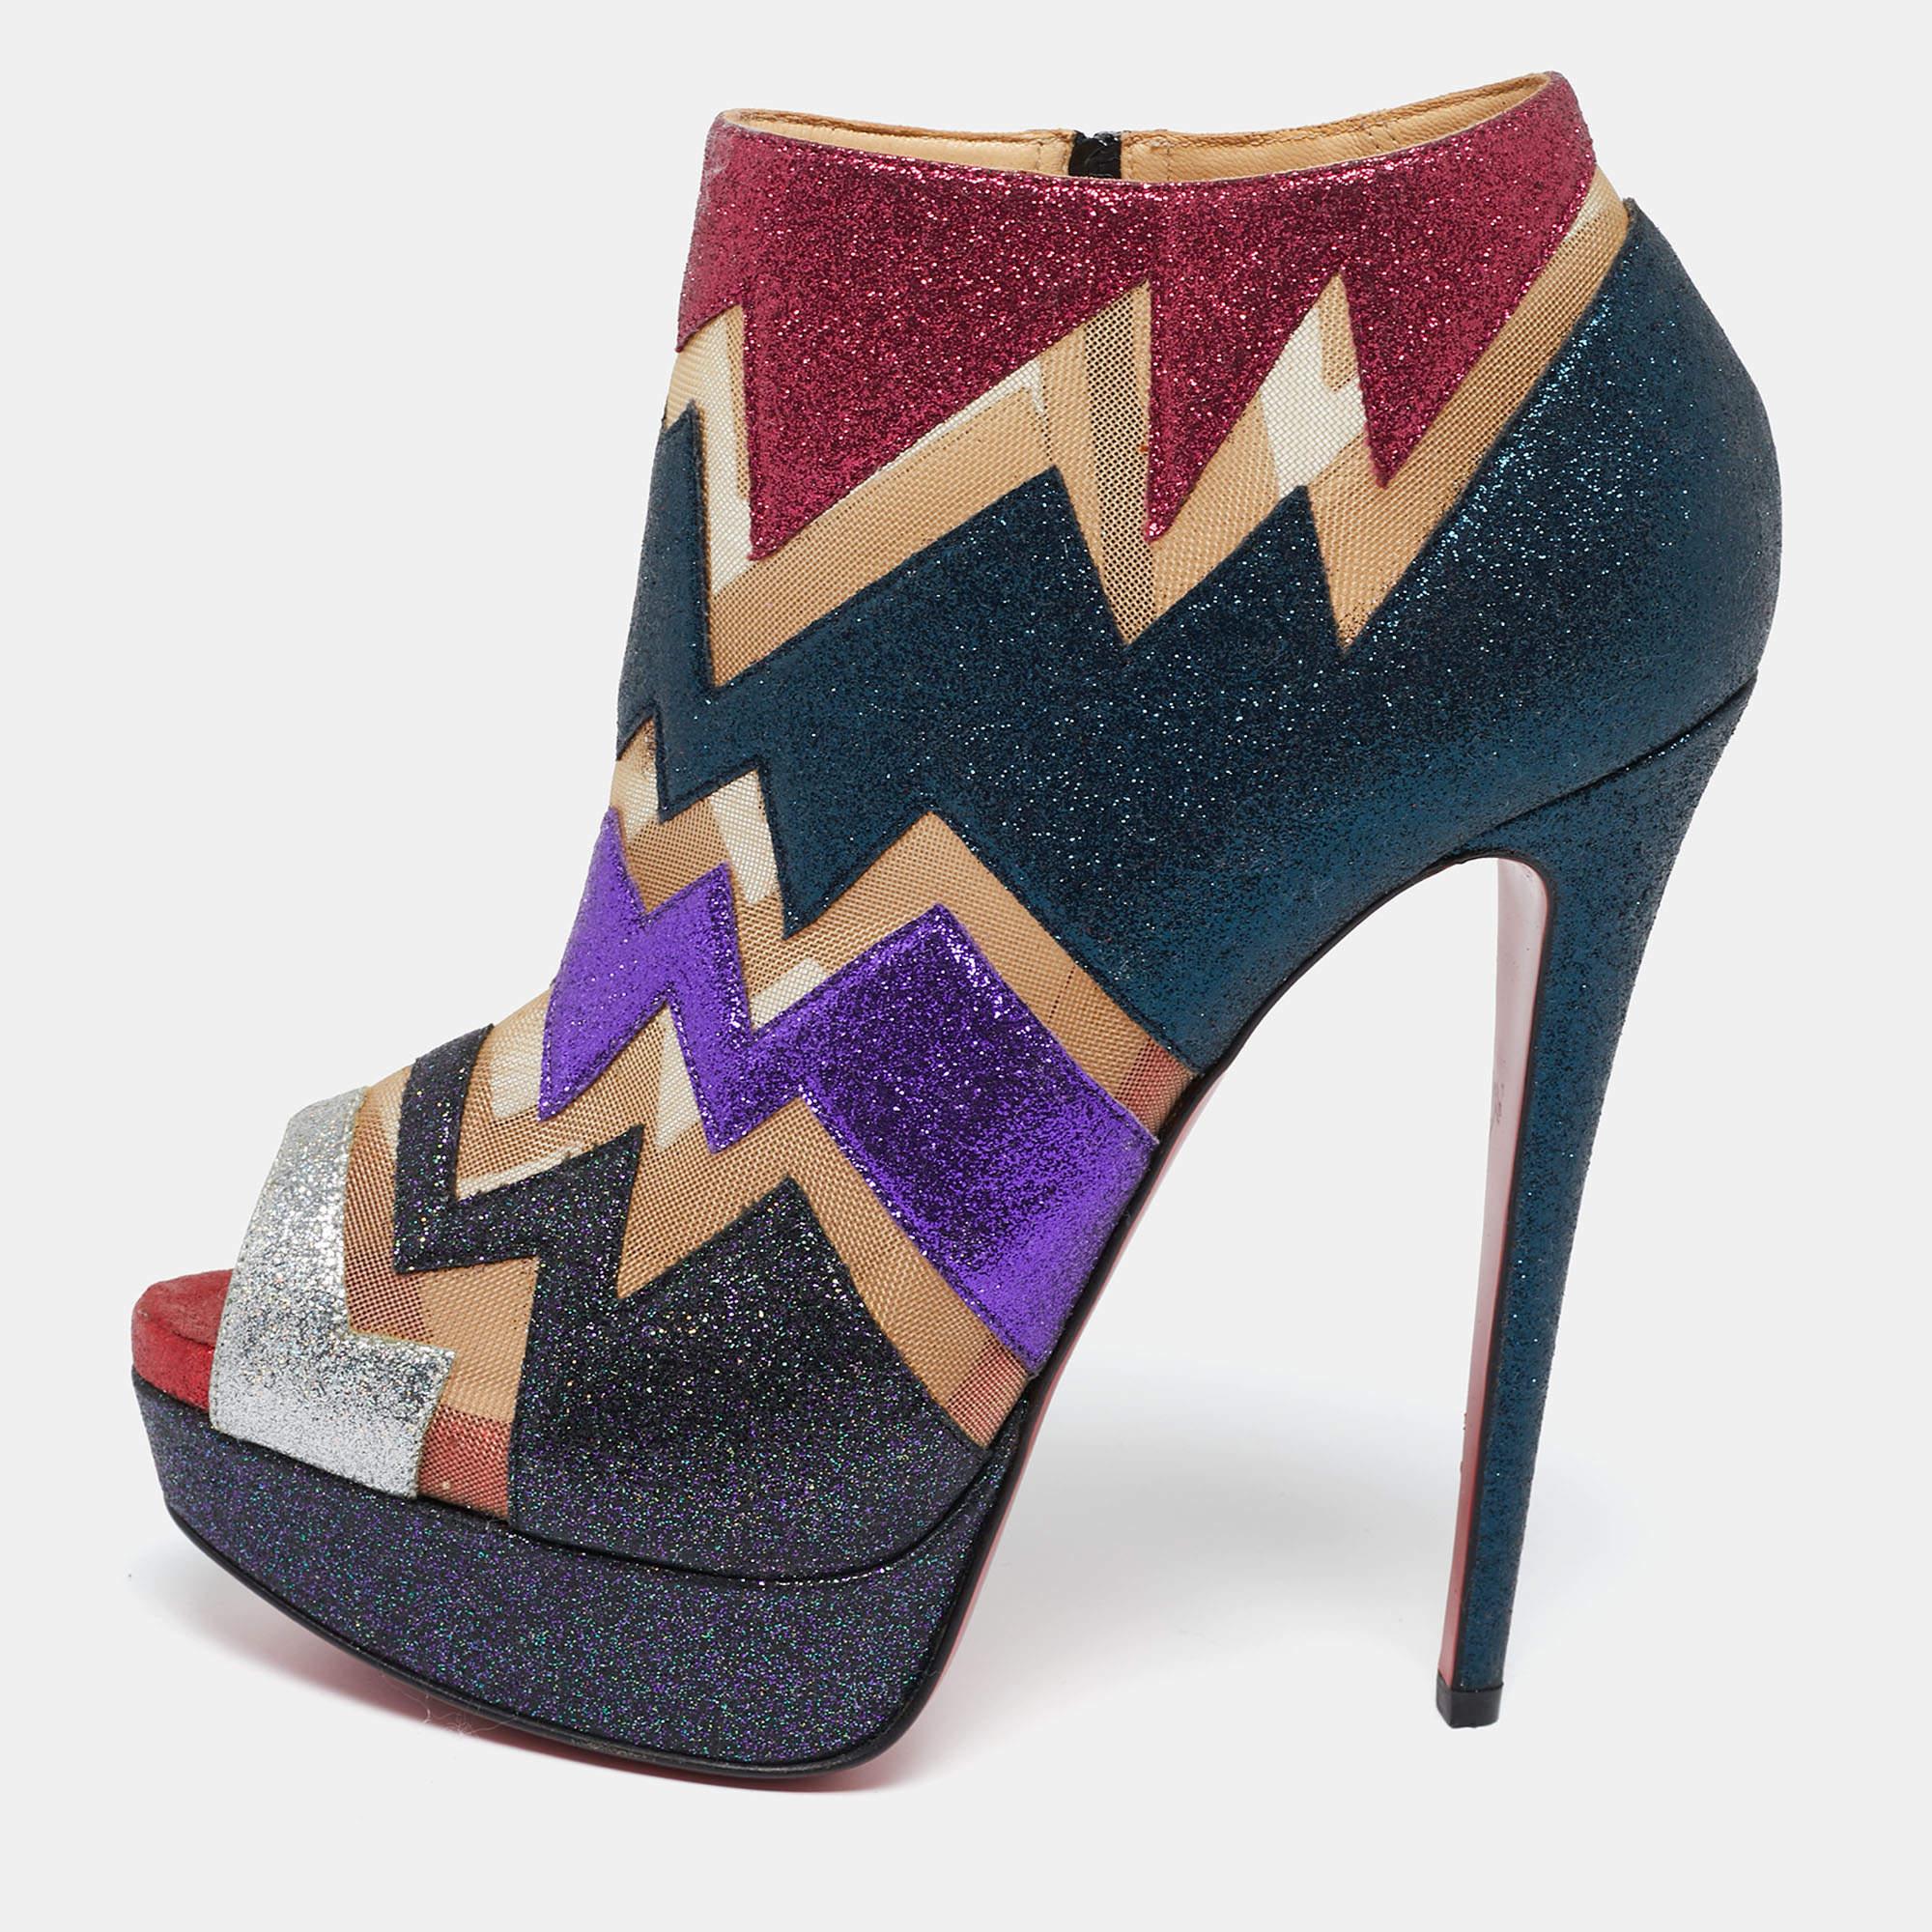 Take every step with confidence and panache in these stunning booties from the House of Christian Louboutin. They are styled using multicolored mesh and glitter on the exterior. They feature peep-toes, platforms, and tall 14.5 cm heels. These